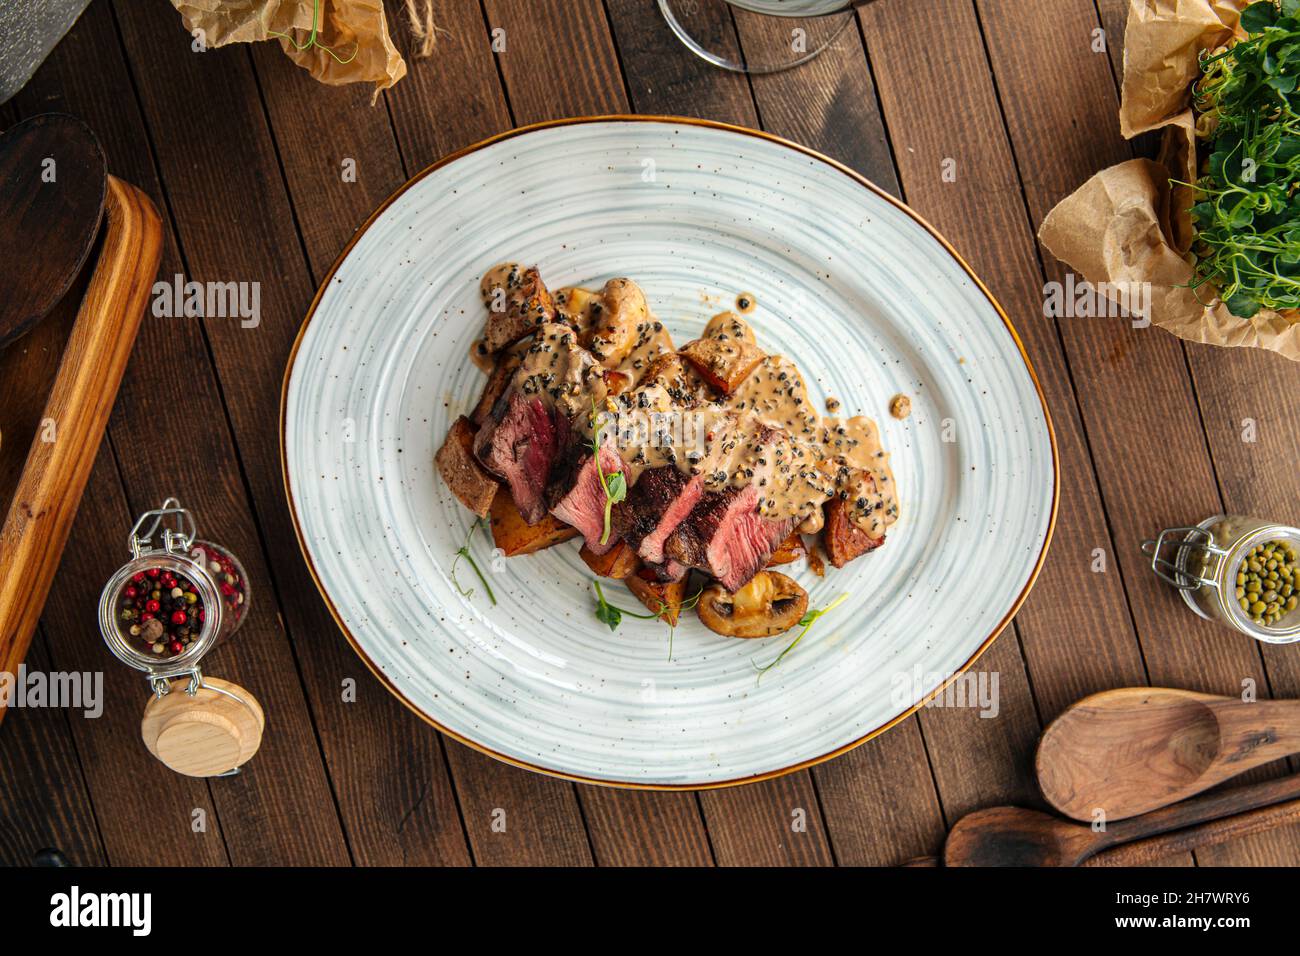 Beef medallions dish with potatoes and mushrooms Stock Photo